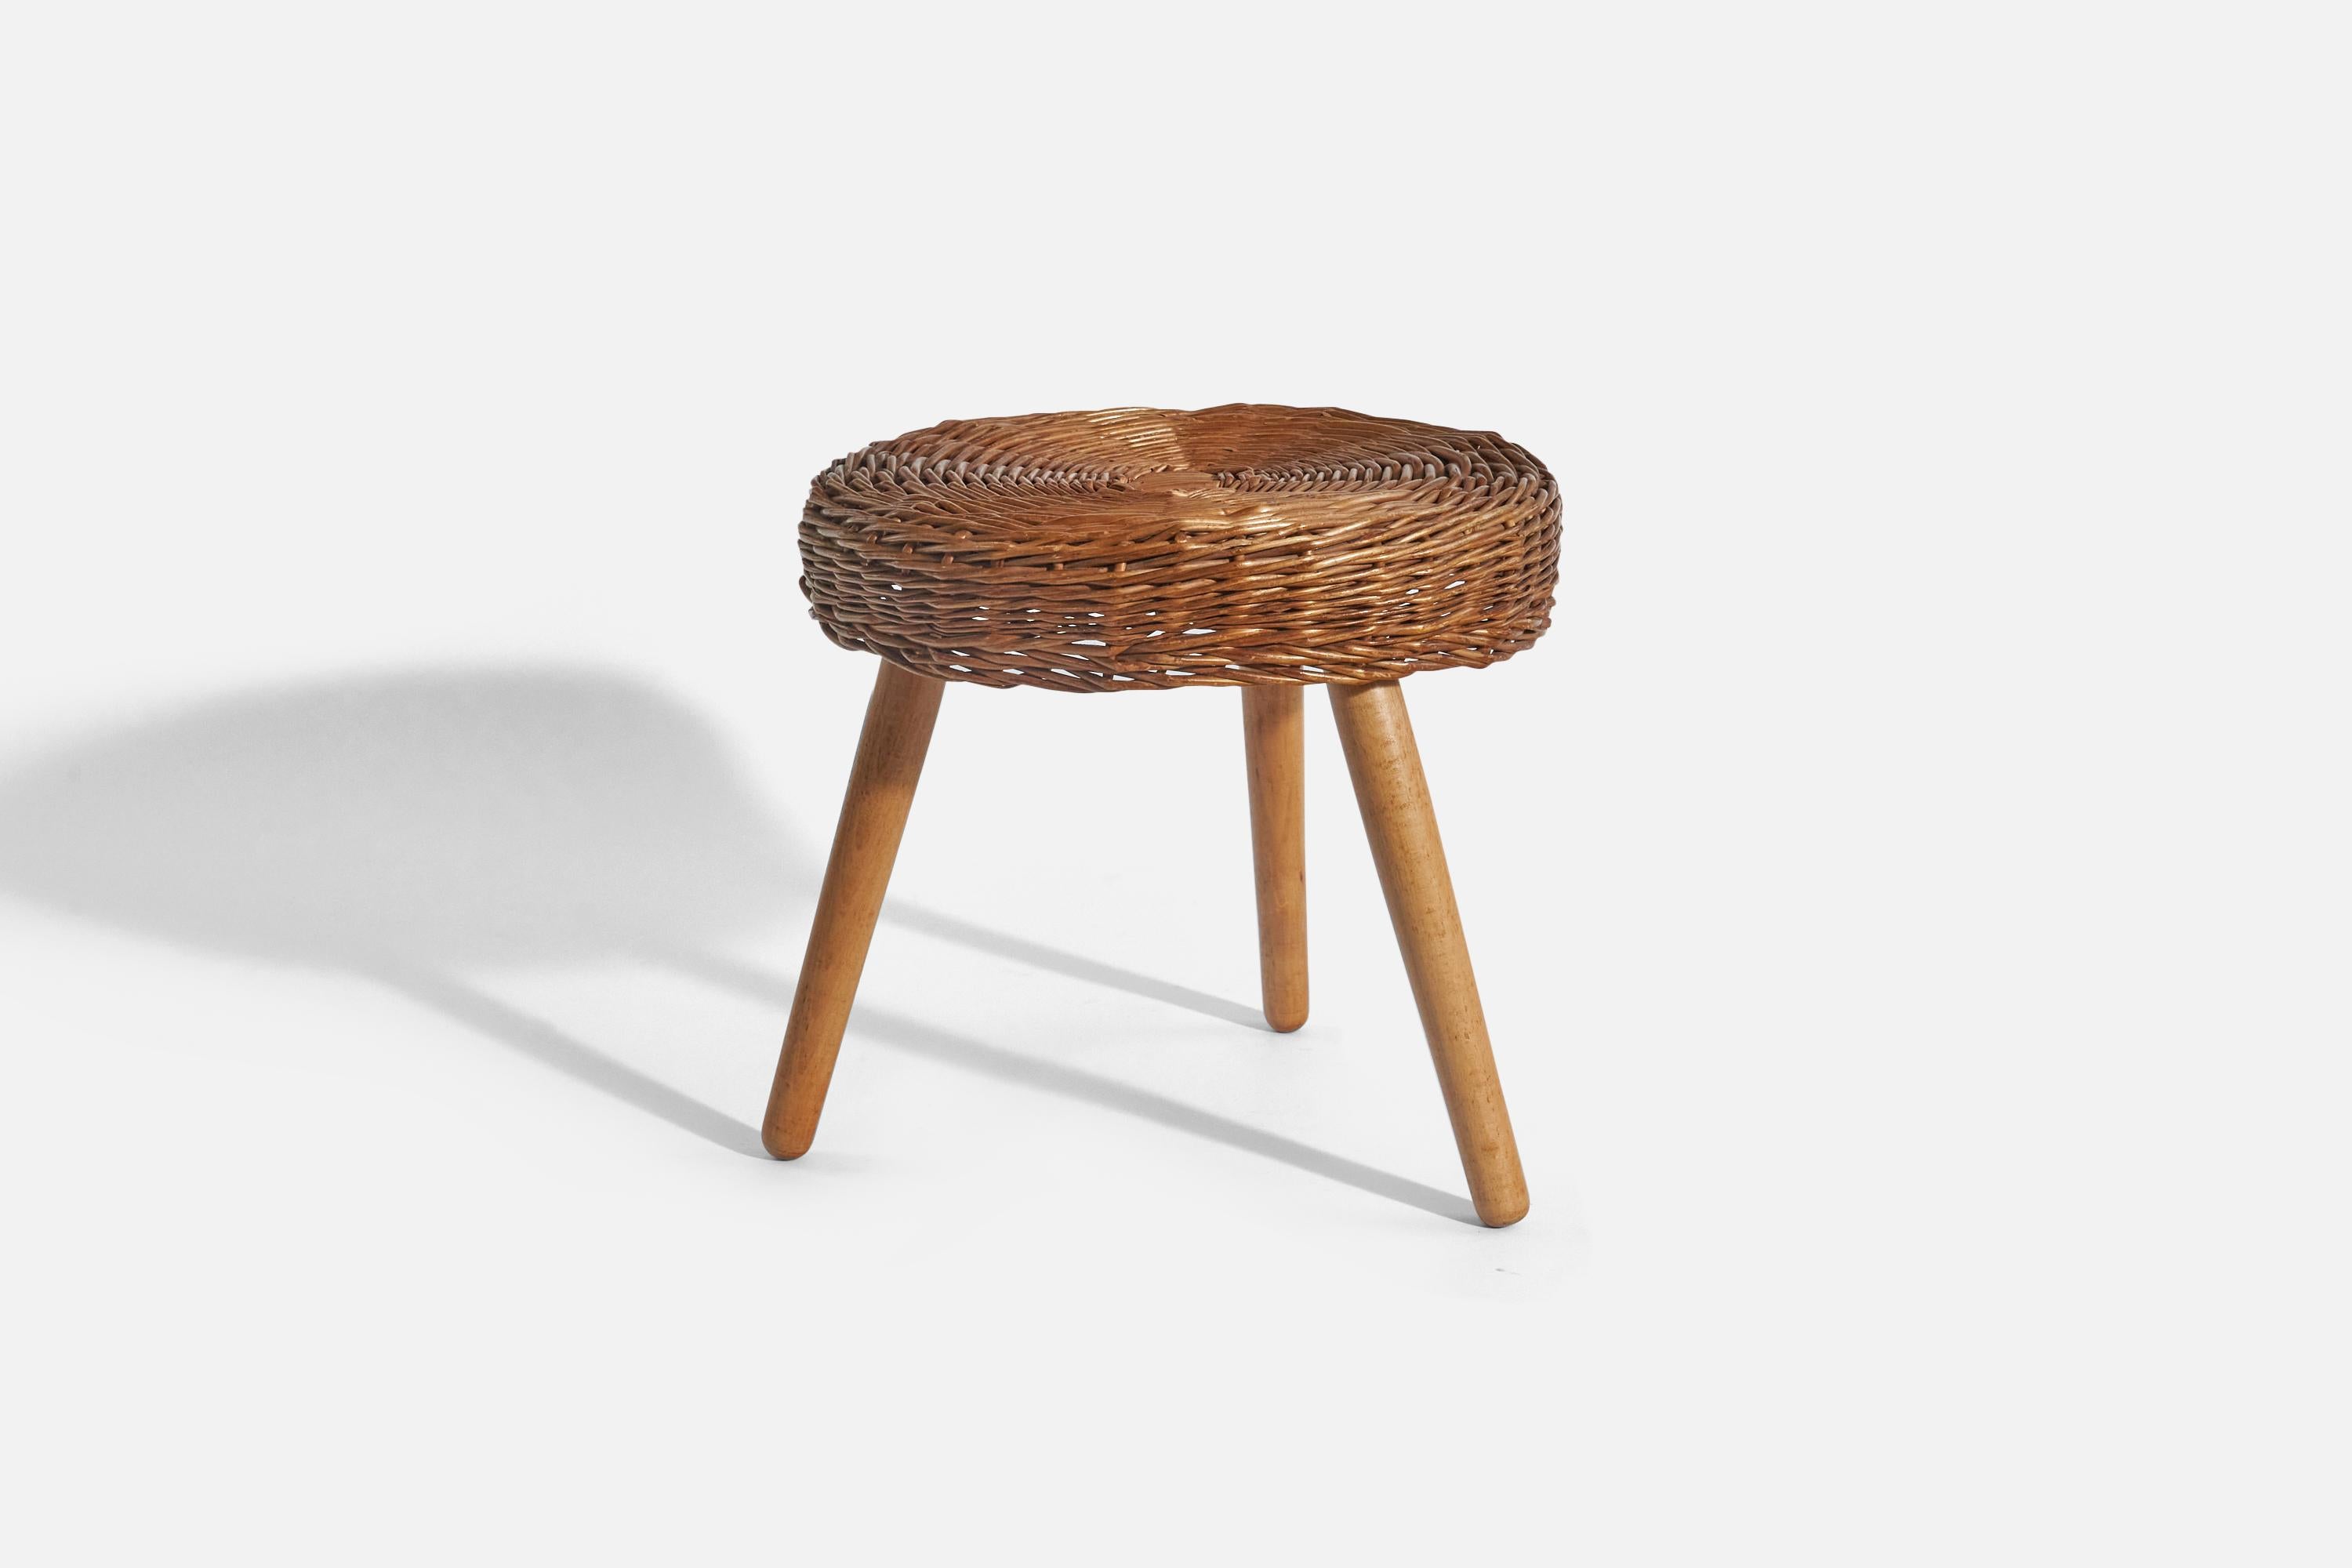 A wicker and wooden stool; design and production attributed to Tony Paul, United States, 1950s.
  